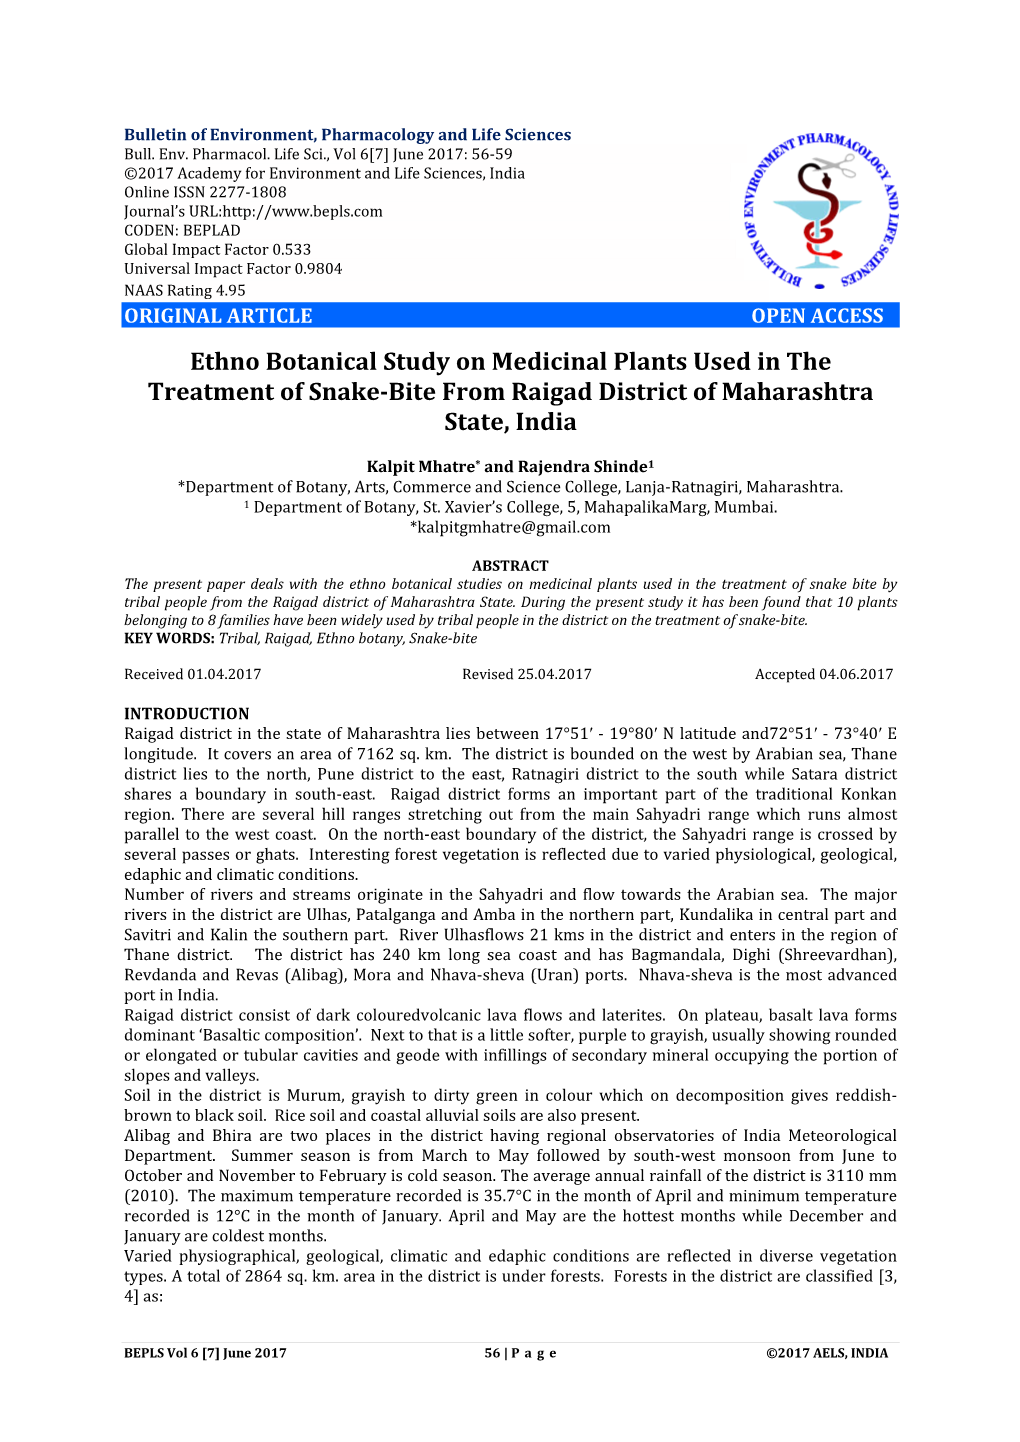 Ethno Botanical Study on Medicinal Plants Used in the Treatment of Snake-Bite from Raigad District of Maharashtra State, India